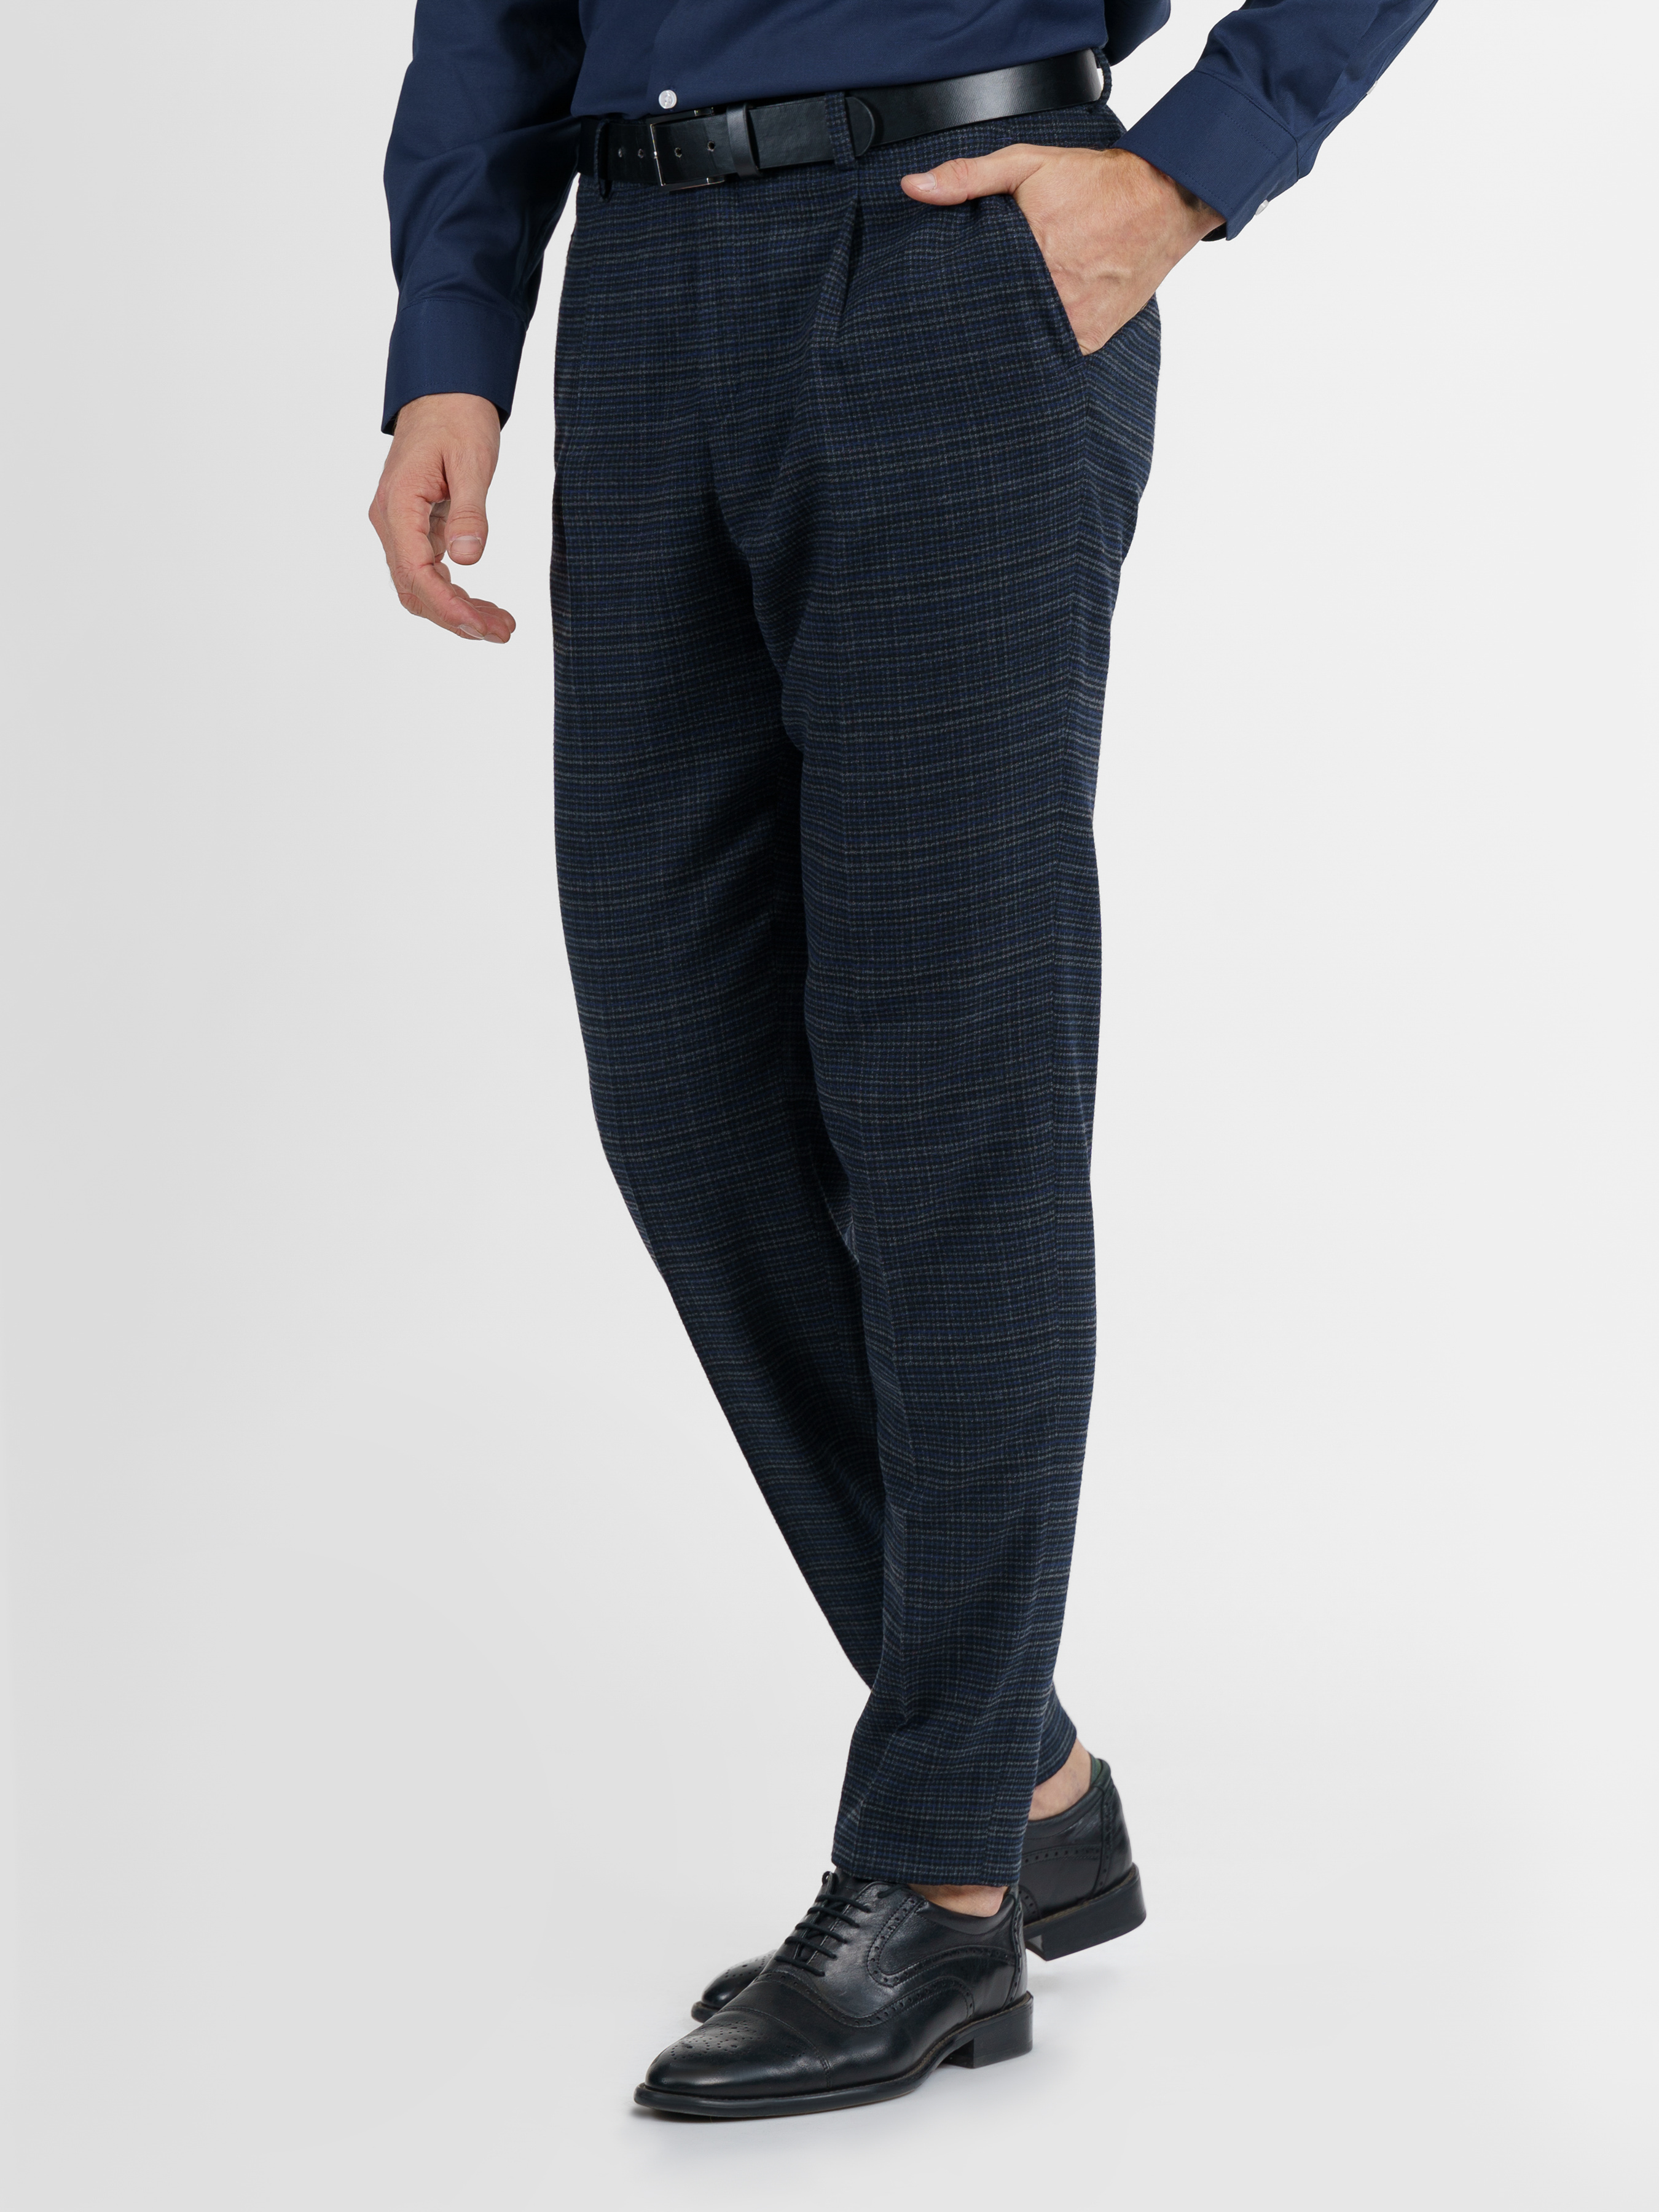 Twisted Tailor Super Skinny Suit Trousers In Light Blue Check, $20 | Asos |  Lookastic